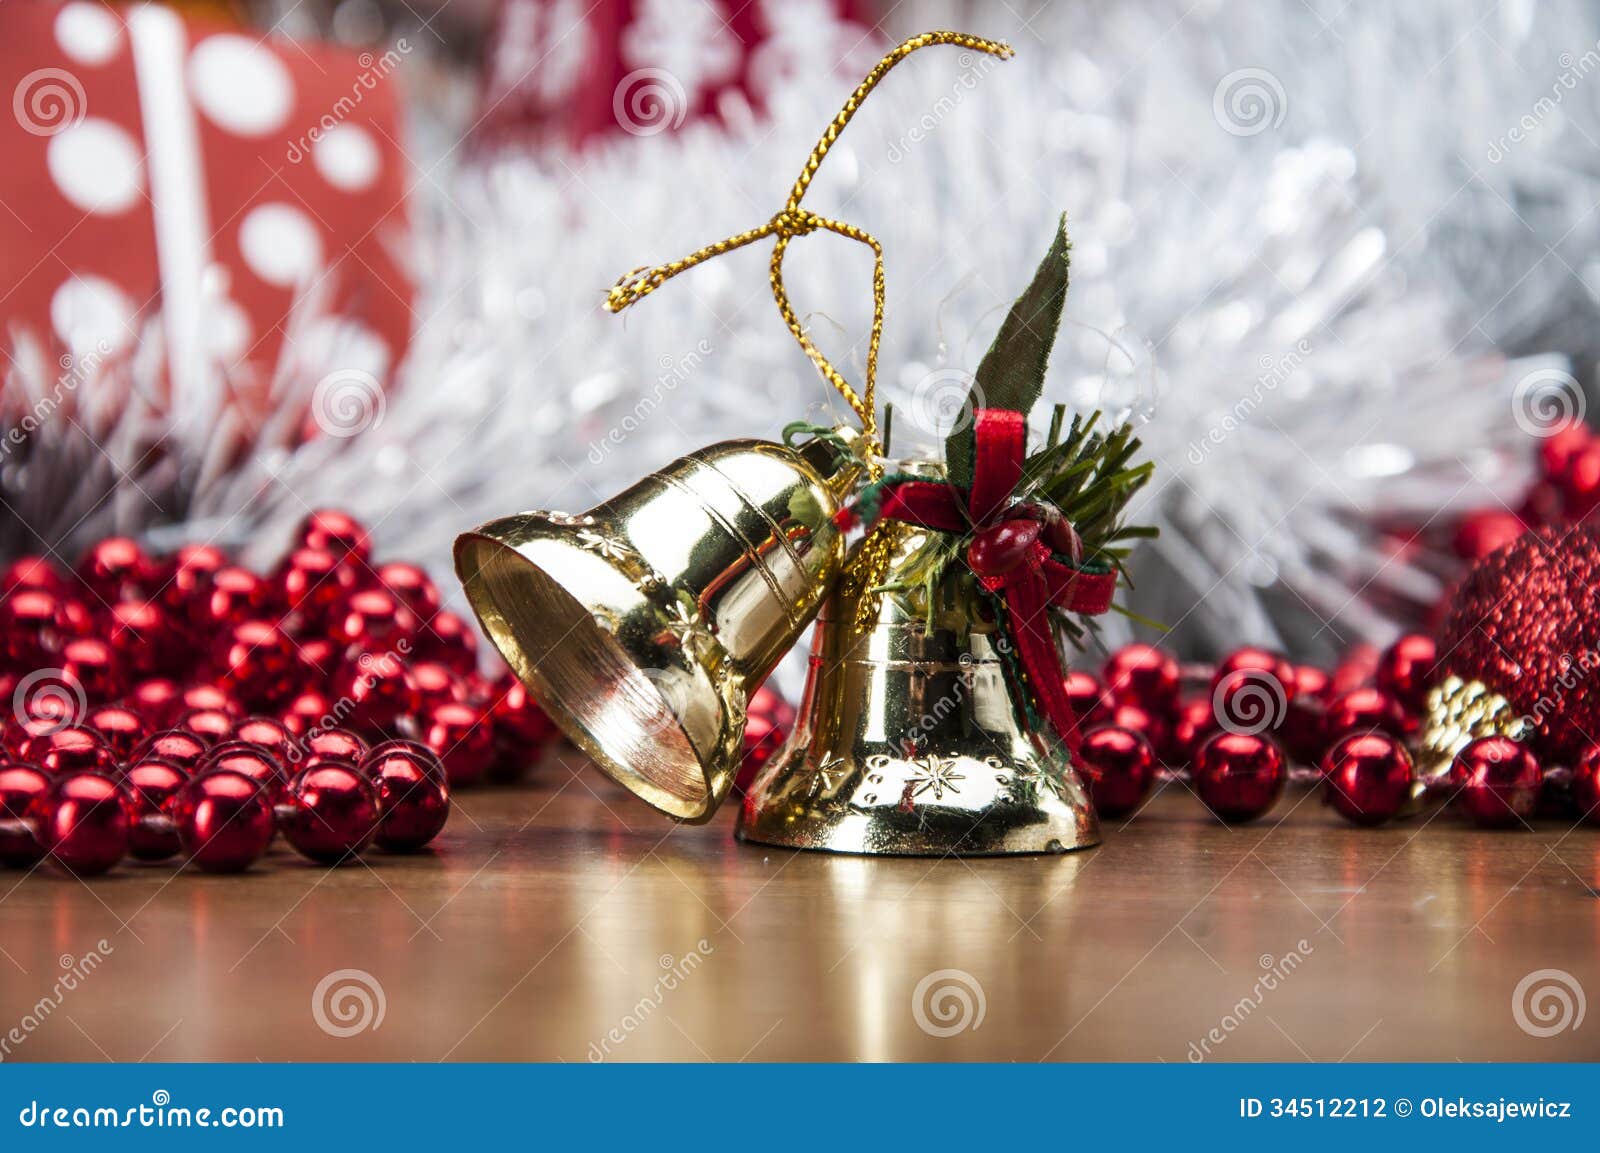 Christmas Stuff On Wooden Table With Dark Background Stock Photography 